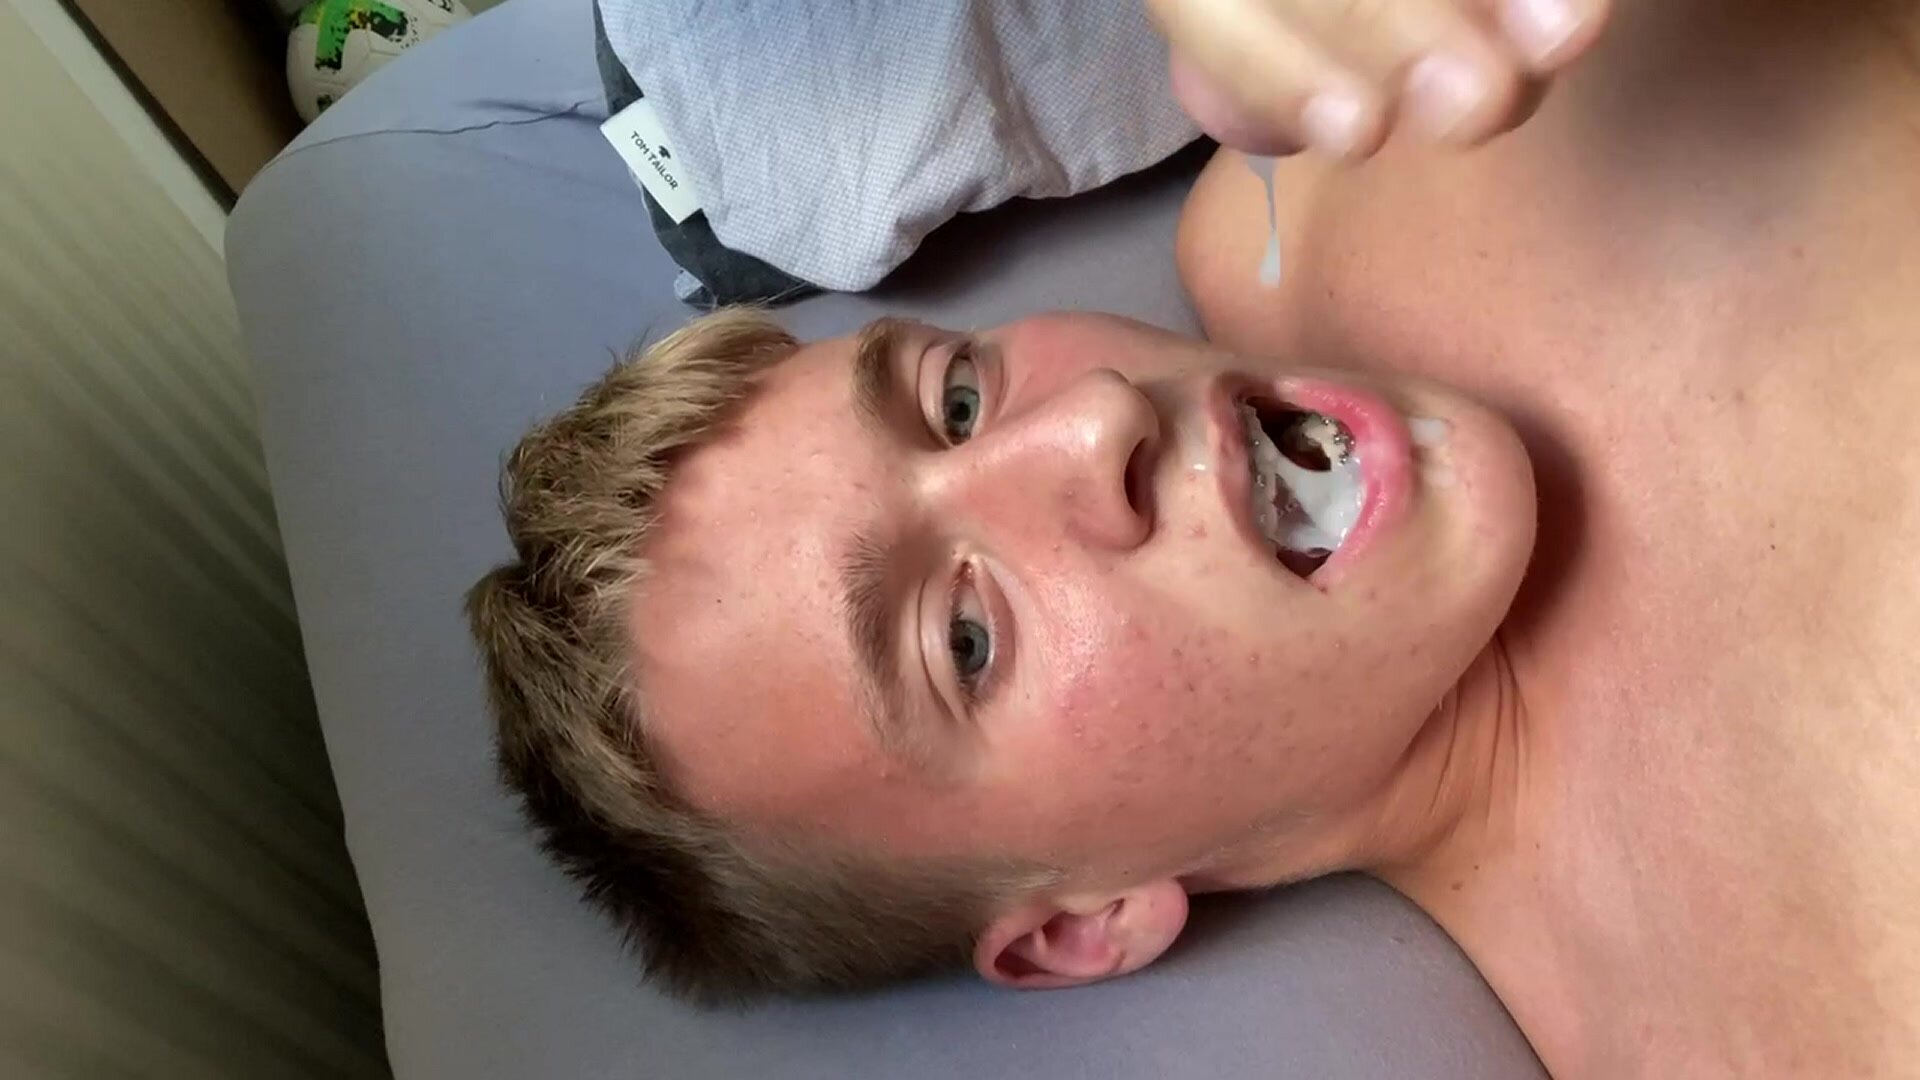 Braces guy cumming on own face and in own mouth - video 2